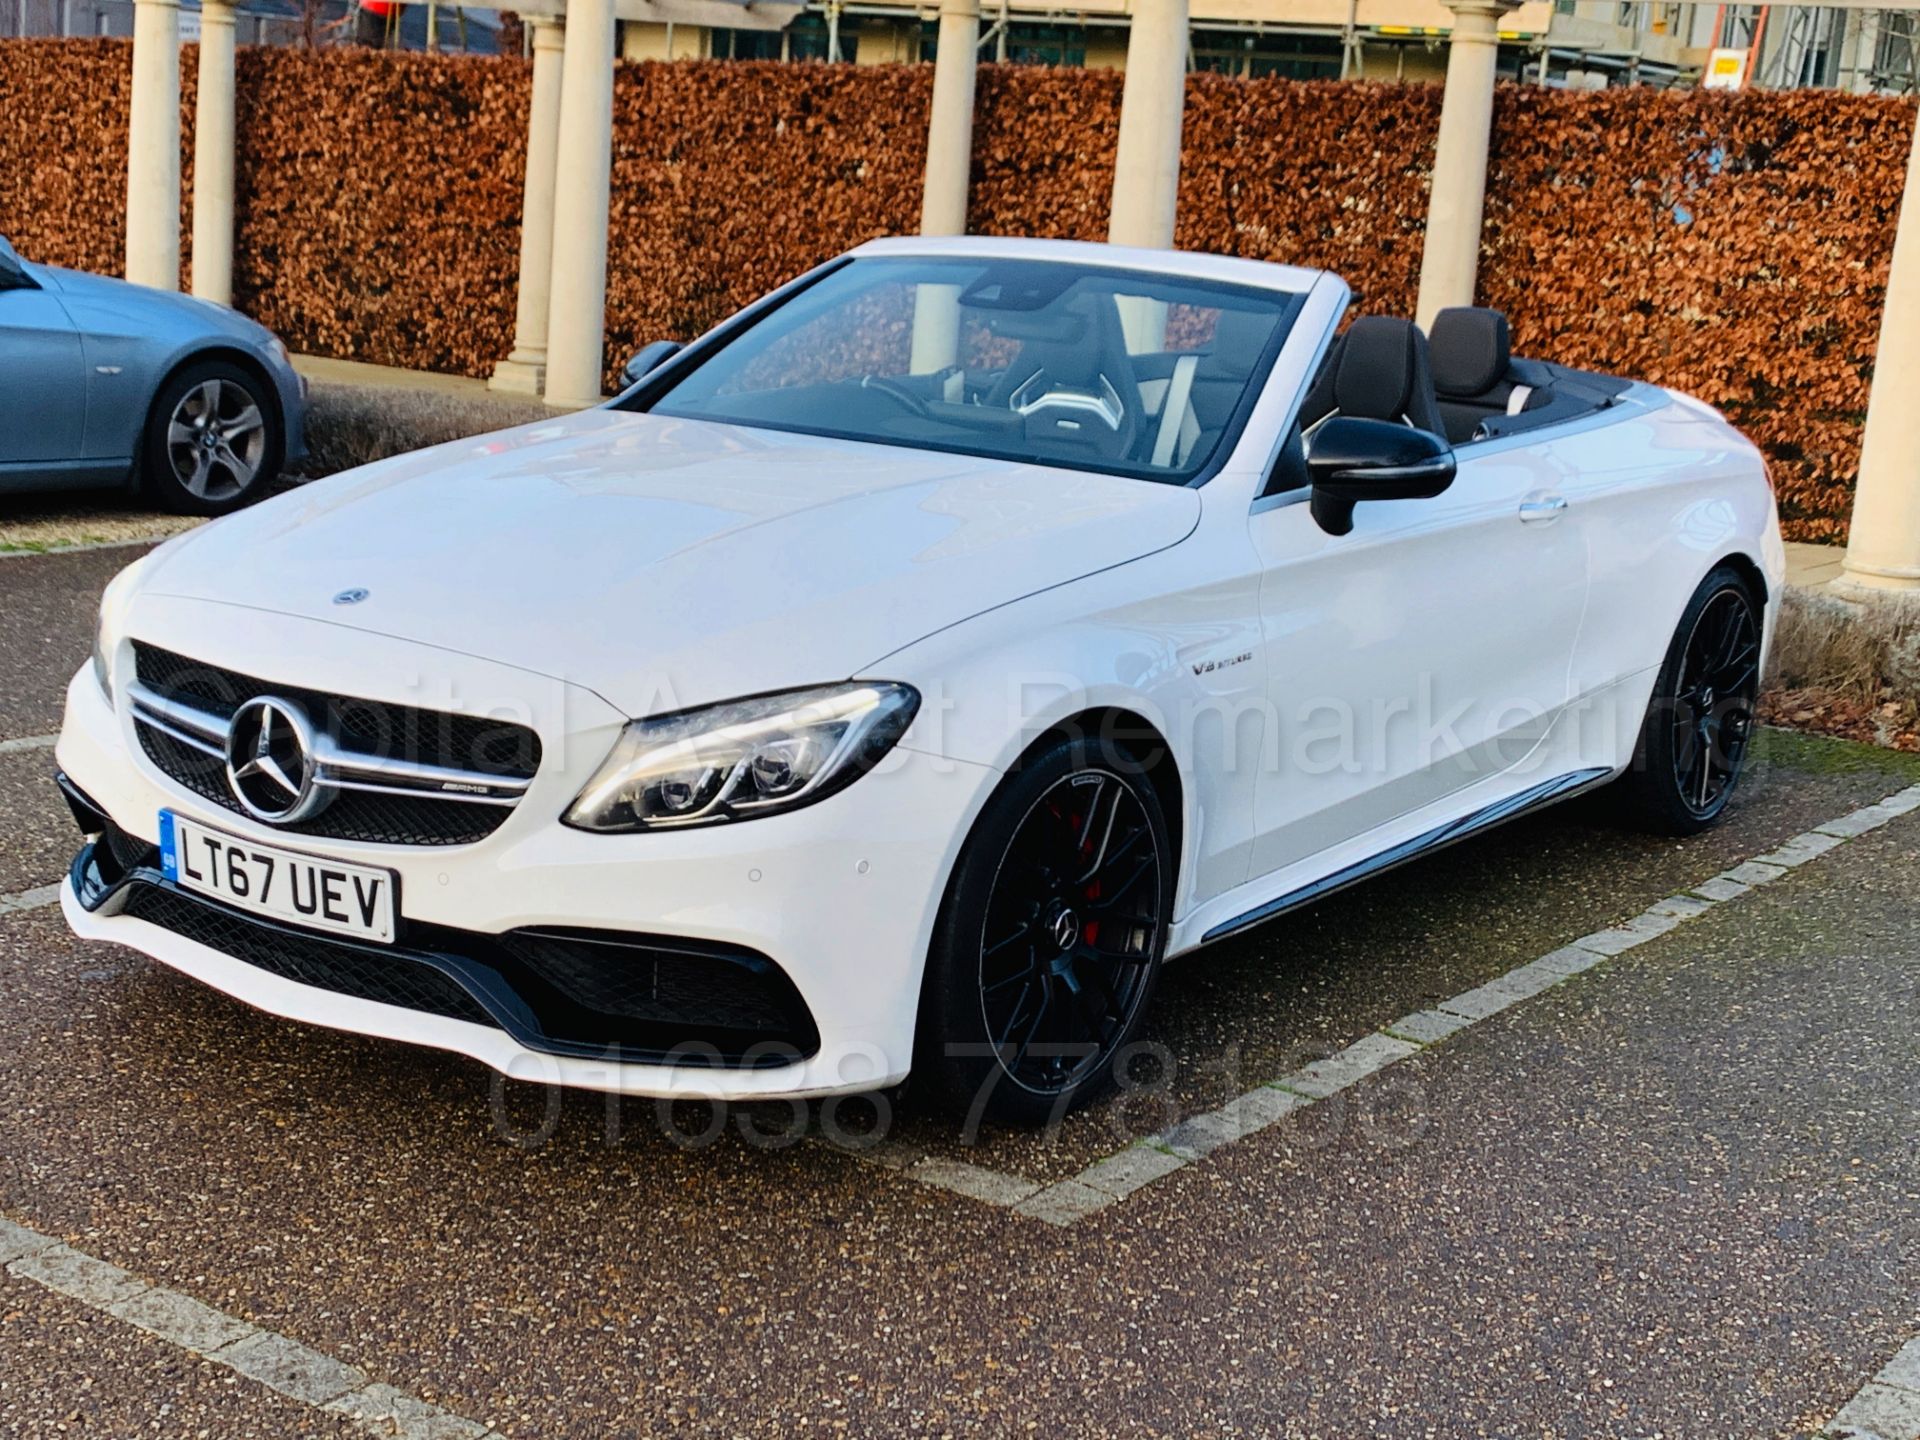 (On Sale) MERCEDES-BENZ AMG C63-S *CABRIOLET* (67 REG) '4.0 BI-TURBO -510 BHP - AUTO' *FULLY LOADED* - Image 11 of 79